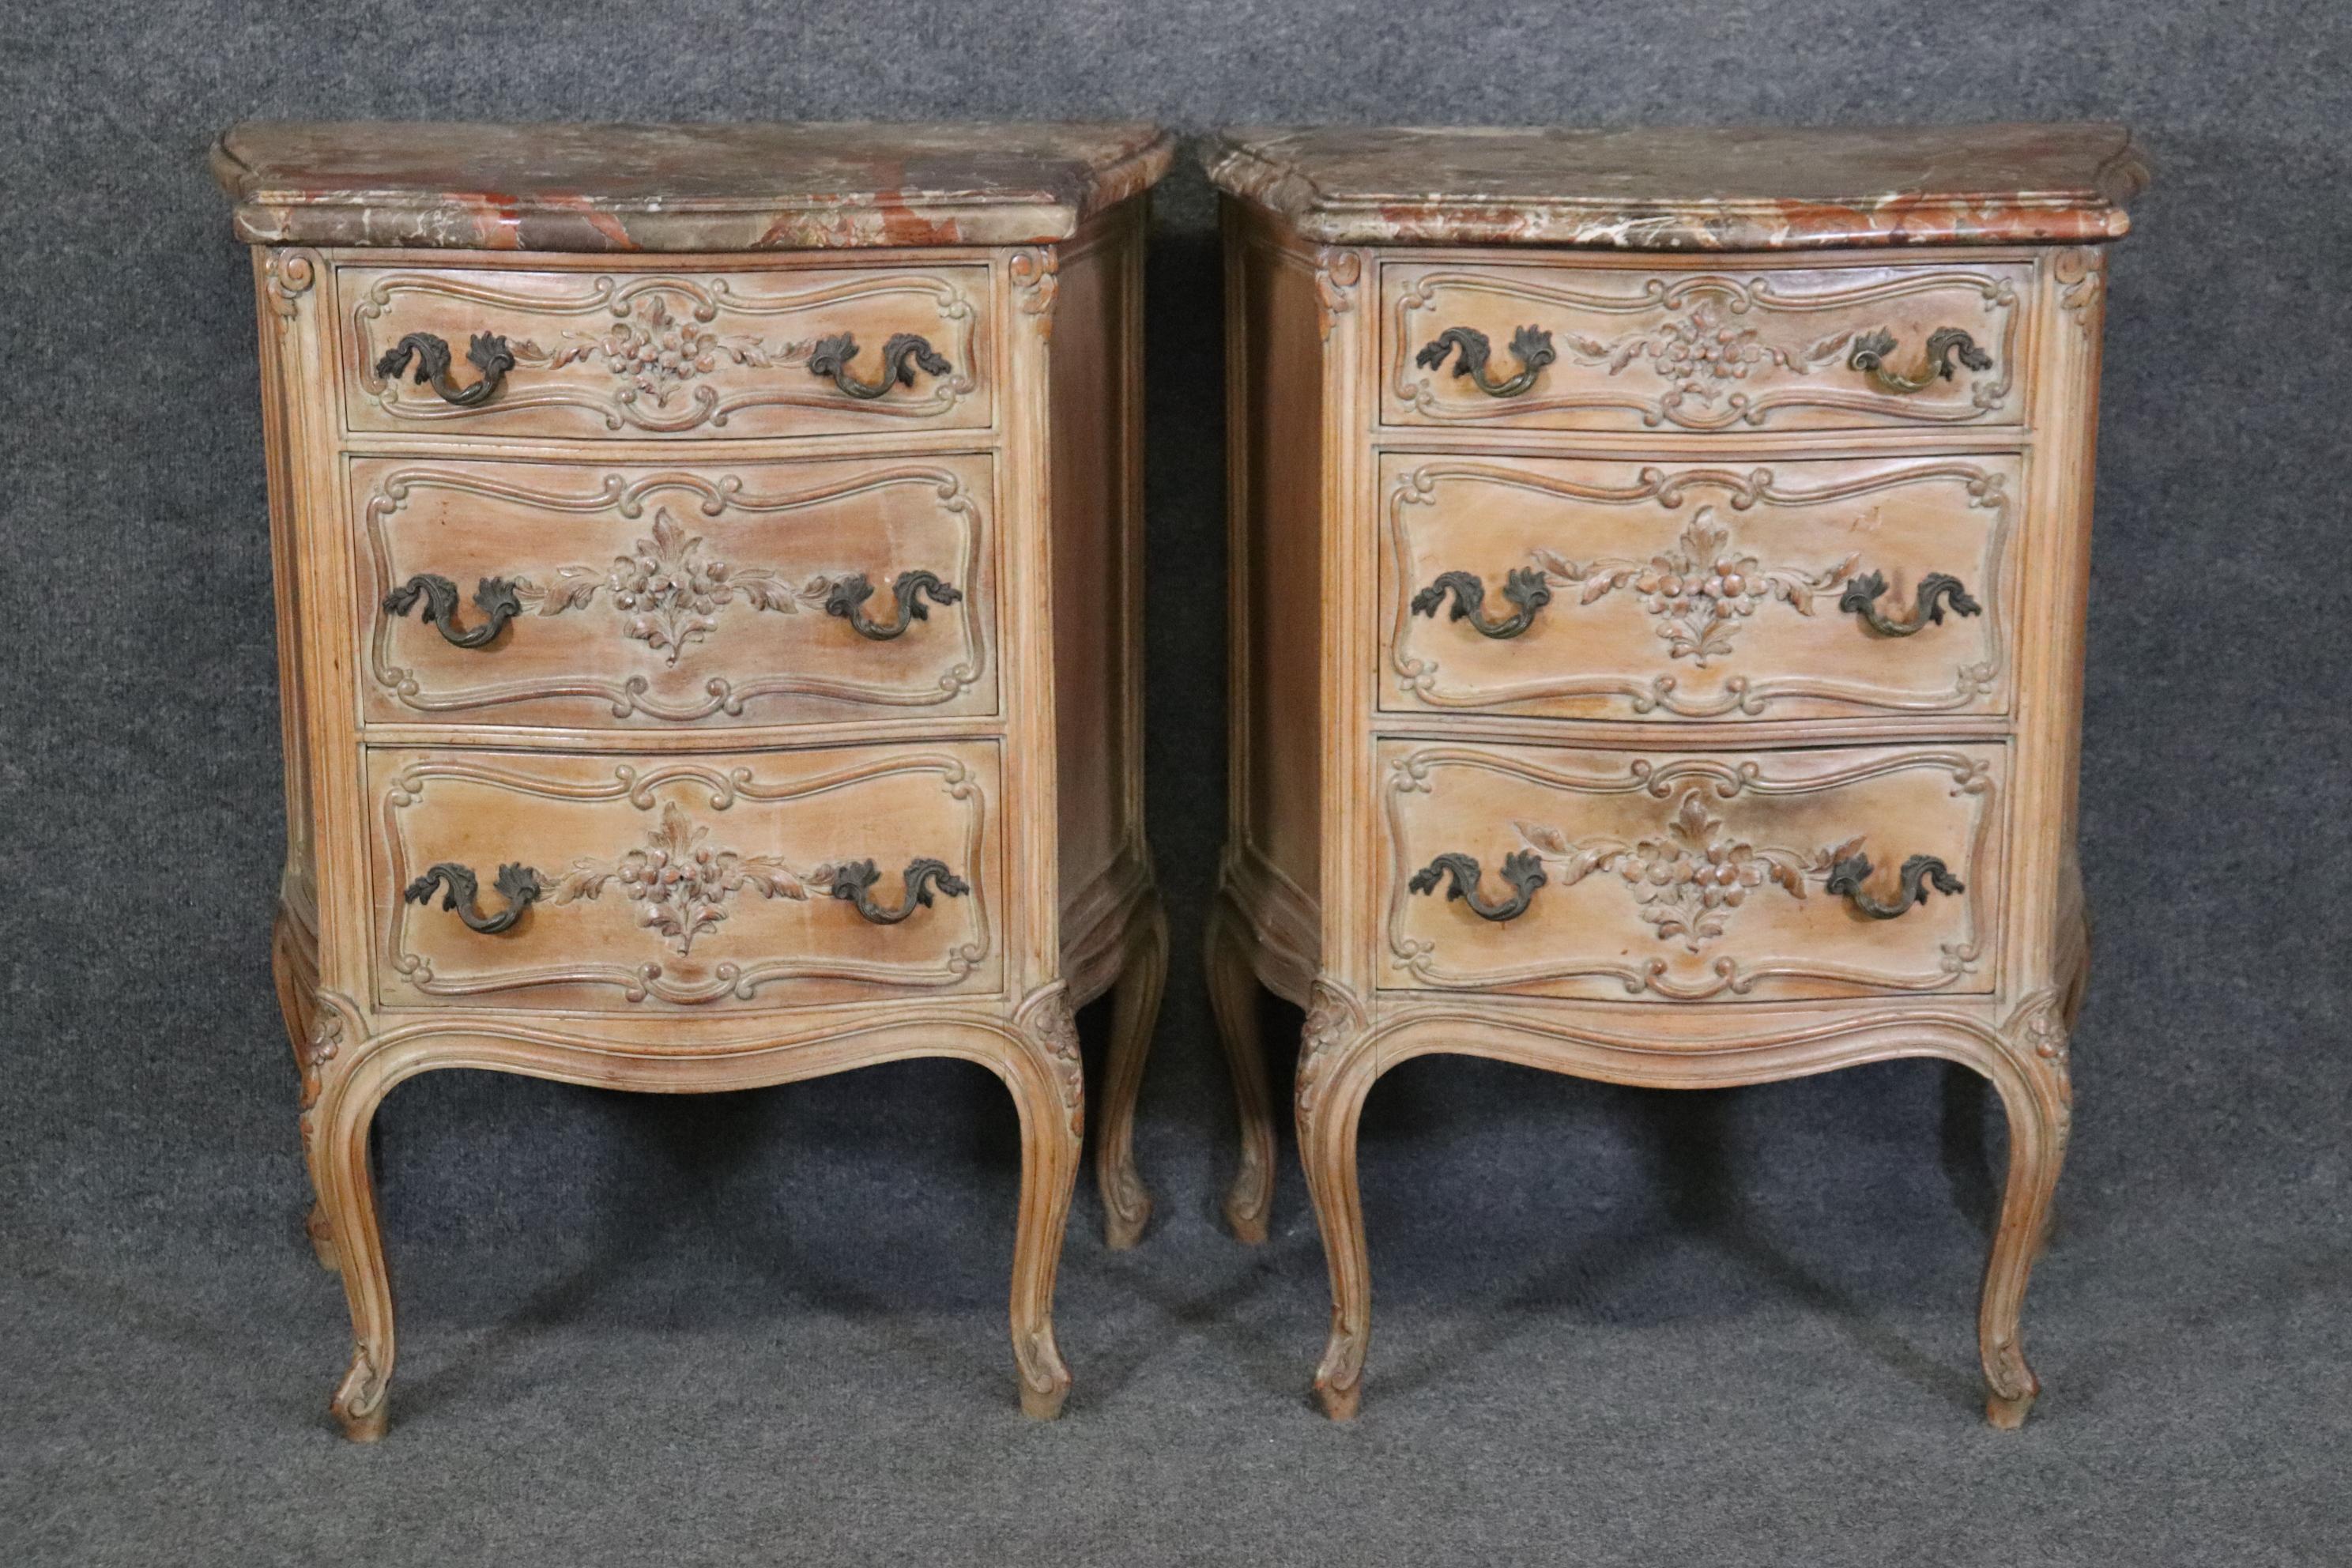 Dimensions: Height: 31 3/4in Width: 23 1/4in Depth: 15 1/4in 

This pair of vintage French Louis XV style marble top commodes, chests of drawers, nightstands is a great example of quality French furniture! If you look at the photos provided, you